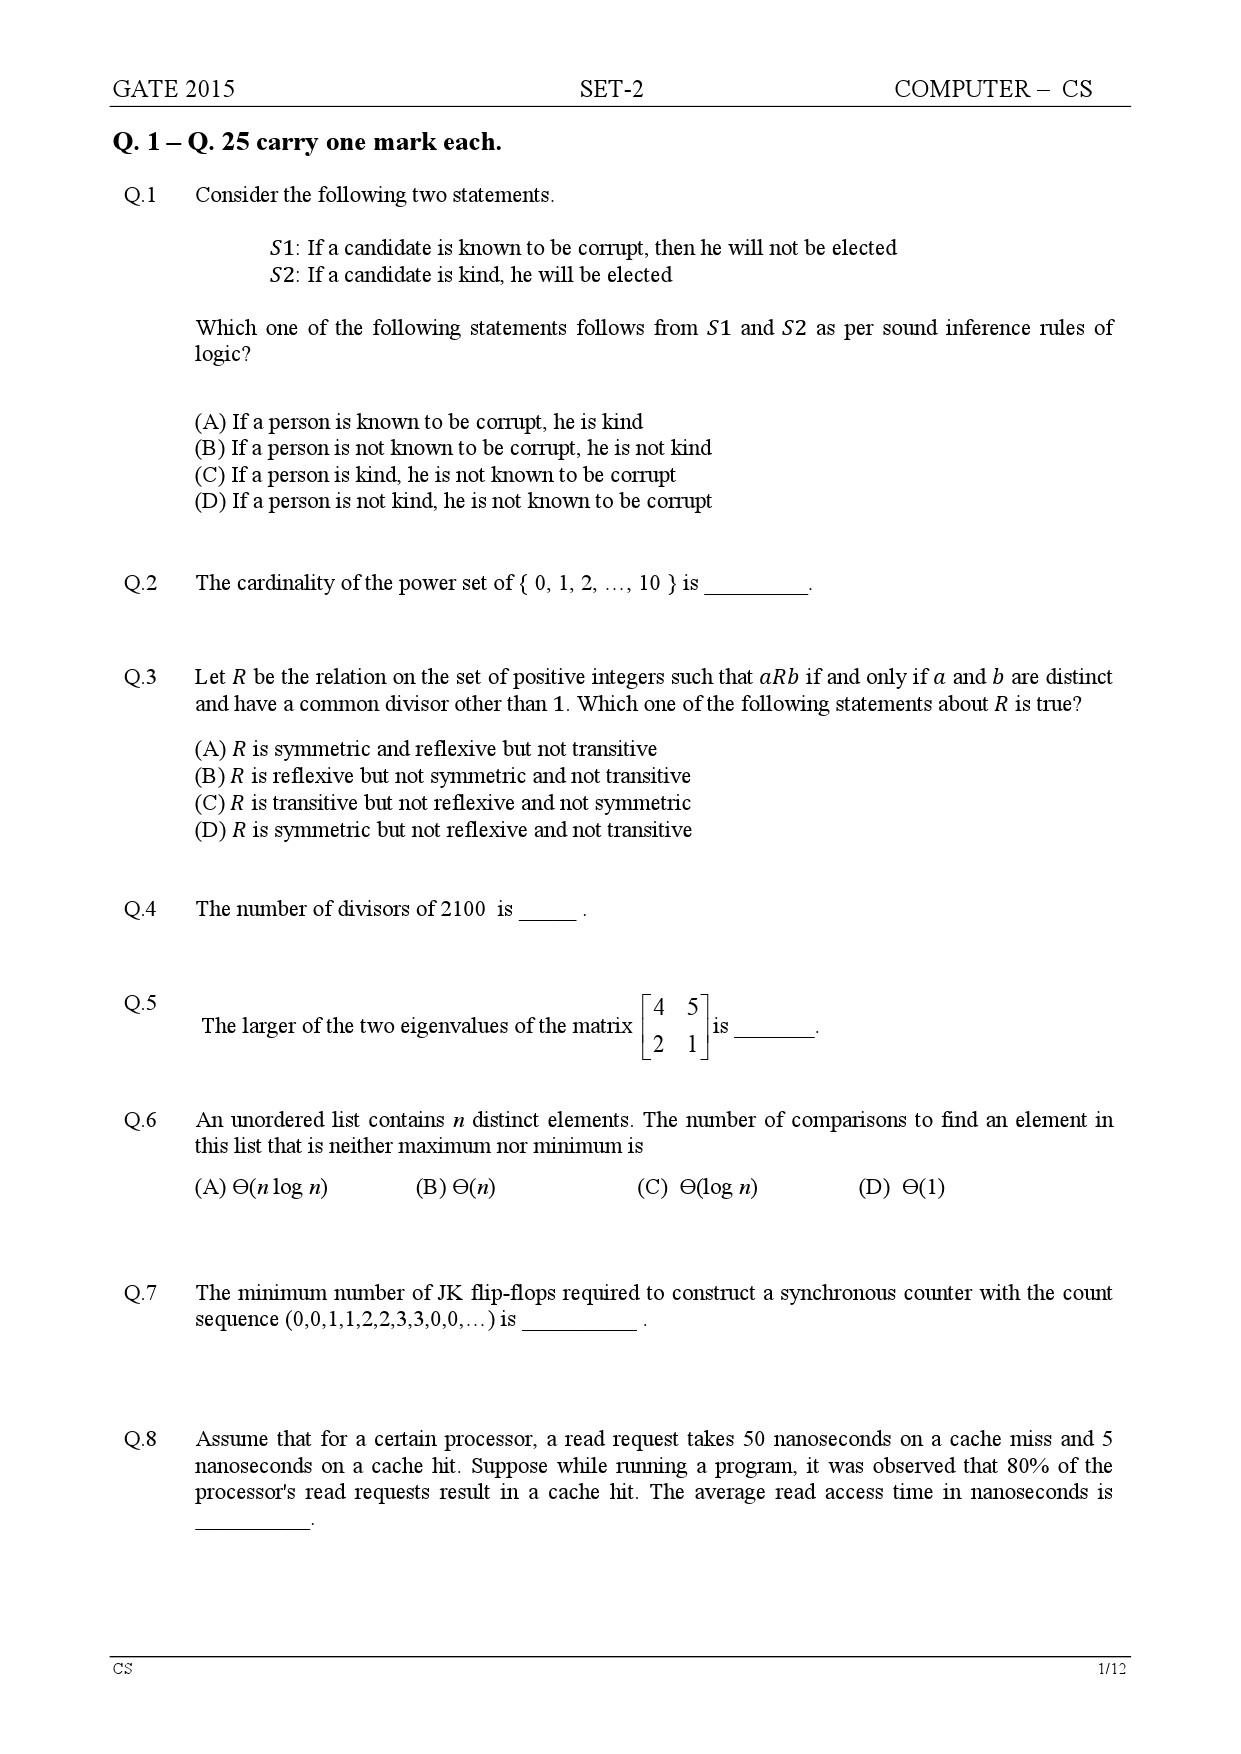 GATE Exam Question Paper 2015 Computer Science and Information Technology Set 2 1